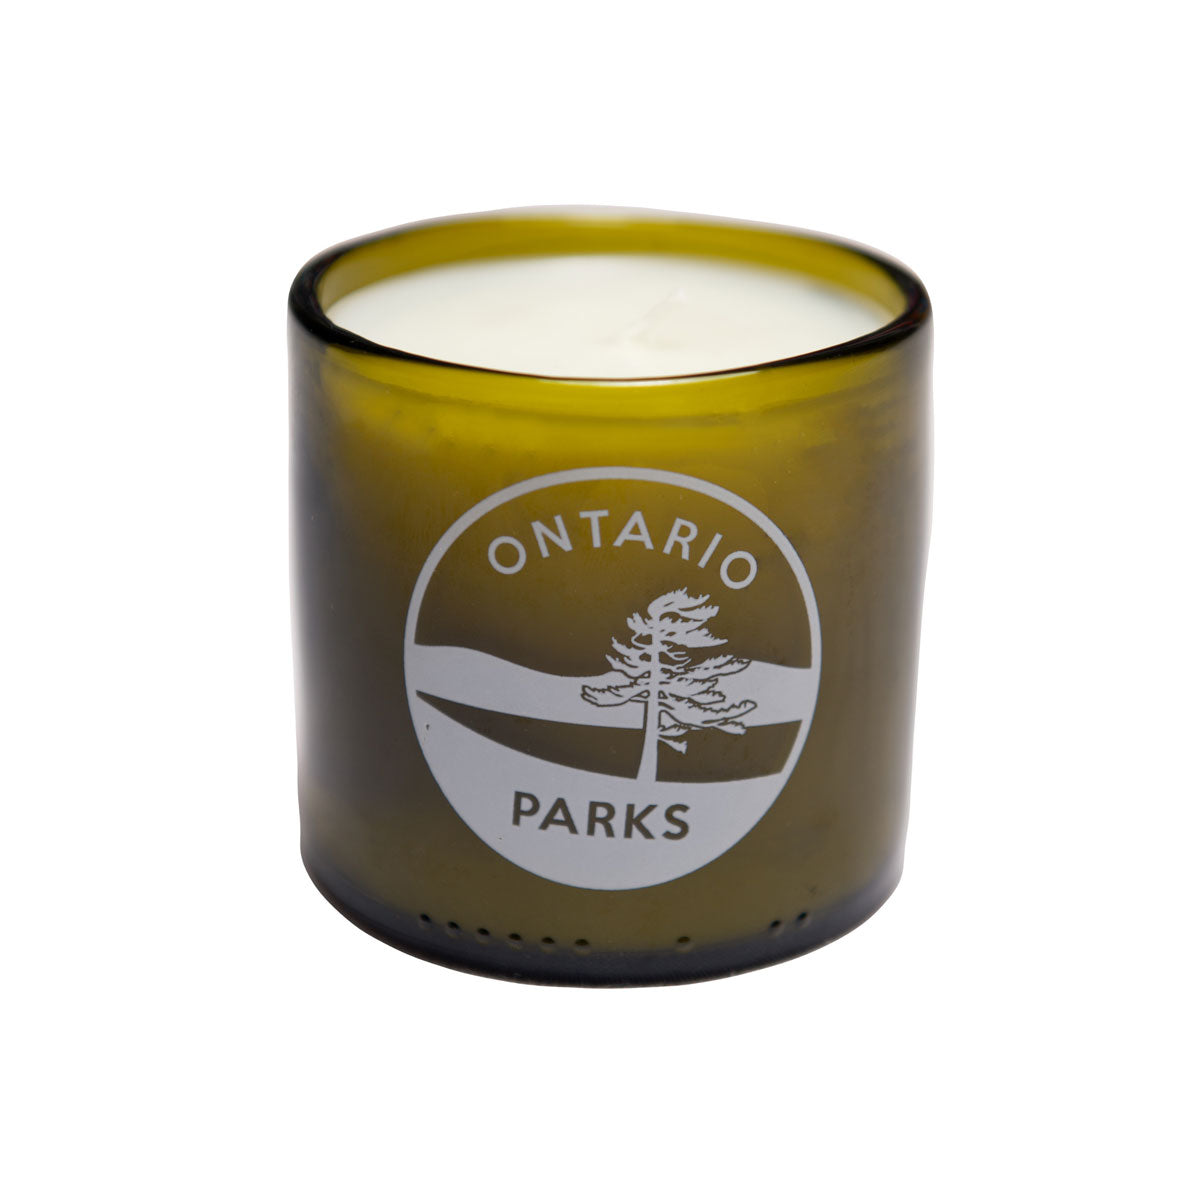 Hand blown glass jar candle in scent Morning Hikes. White Ontario Parks crest screened on glass.